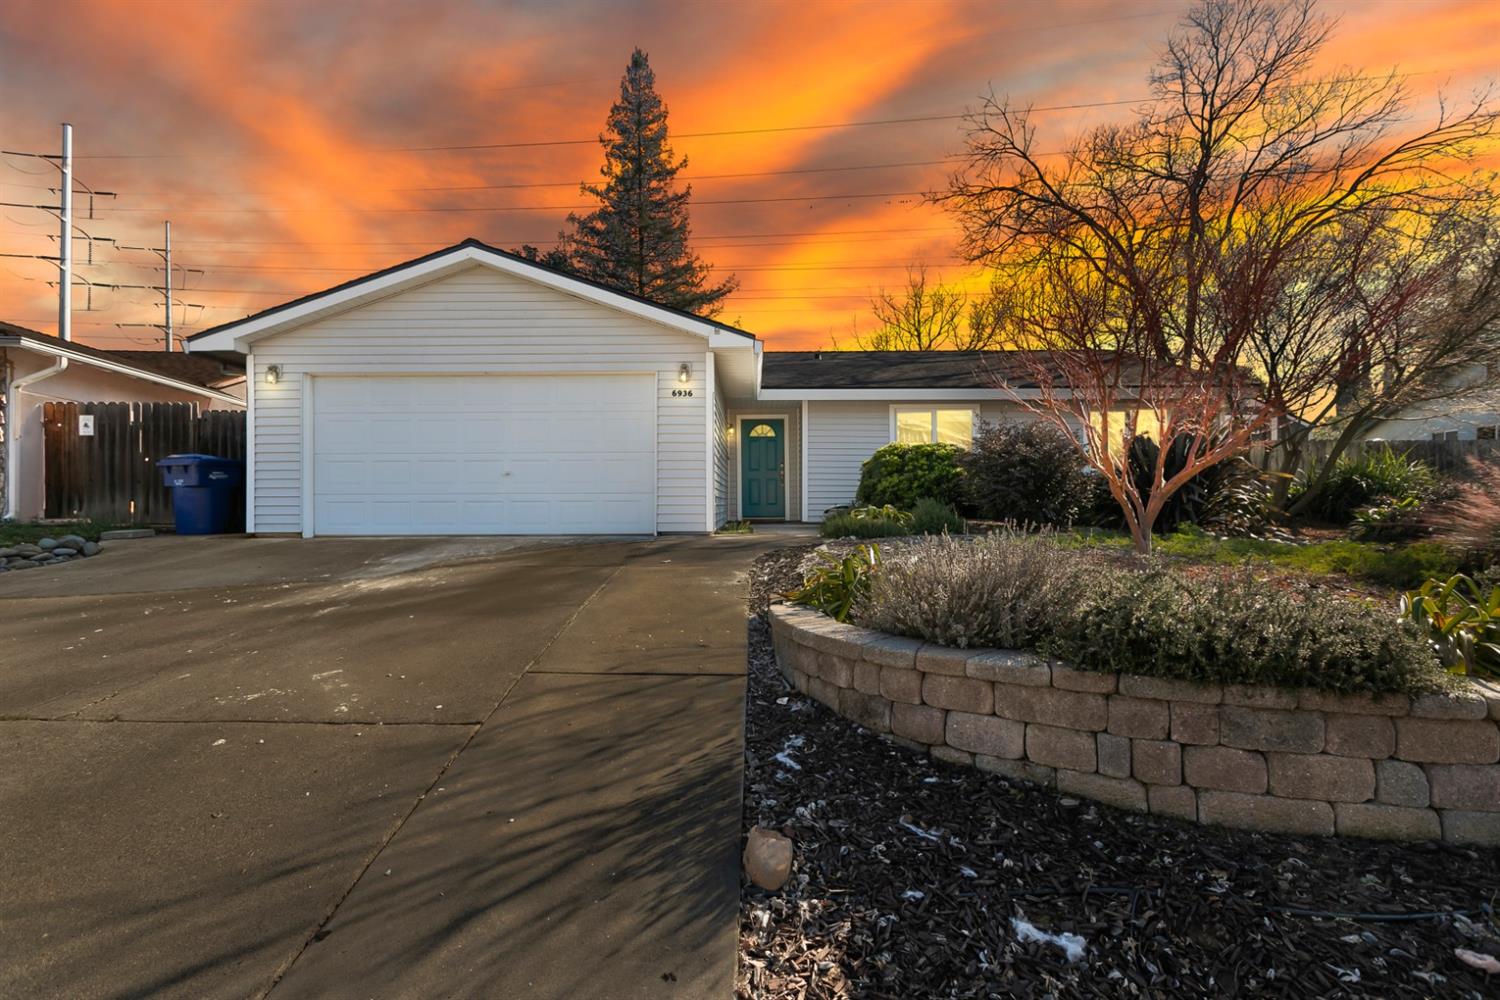 Welcome to this 4 bedroom, 2 bathroom home for sale in Orangevale. This home offers mostly tile floo